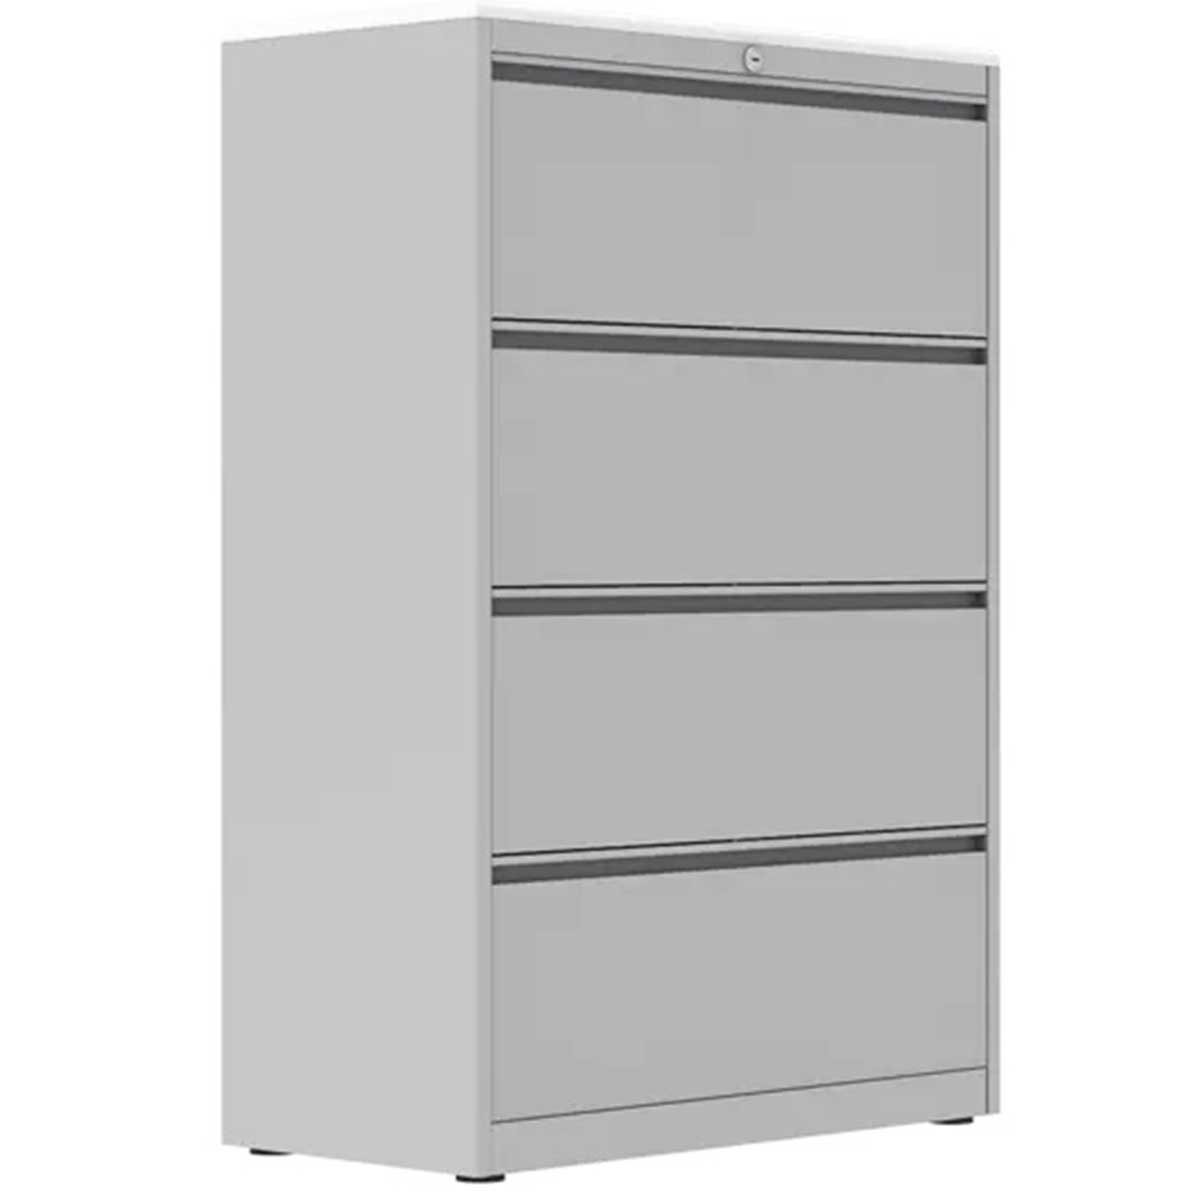 Fire Resistant File Cabinet Manufacturers, Suppliers, Exporters in Delhi 